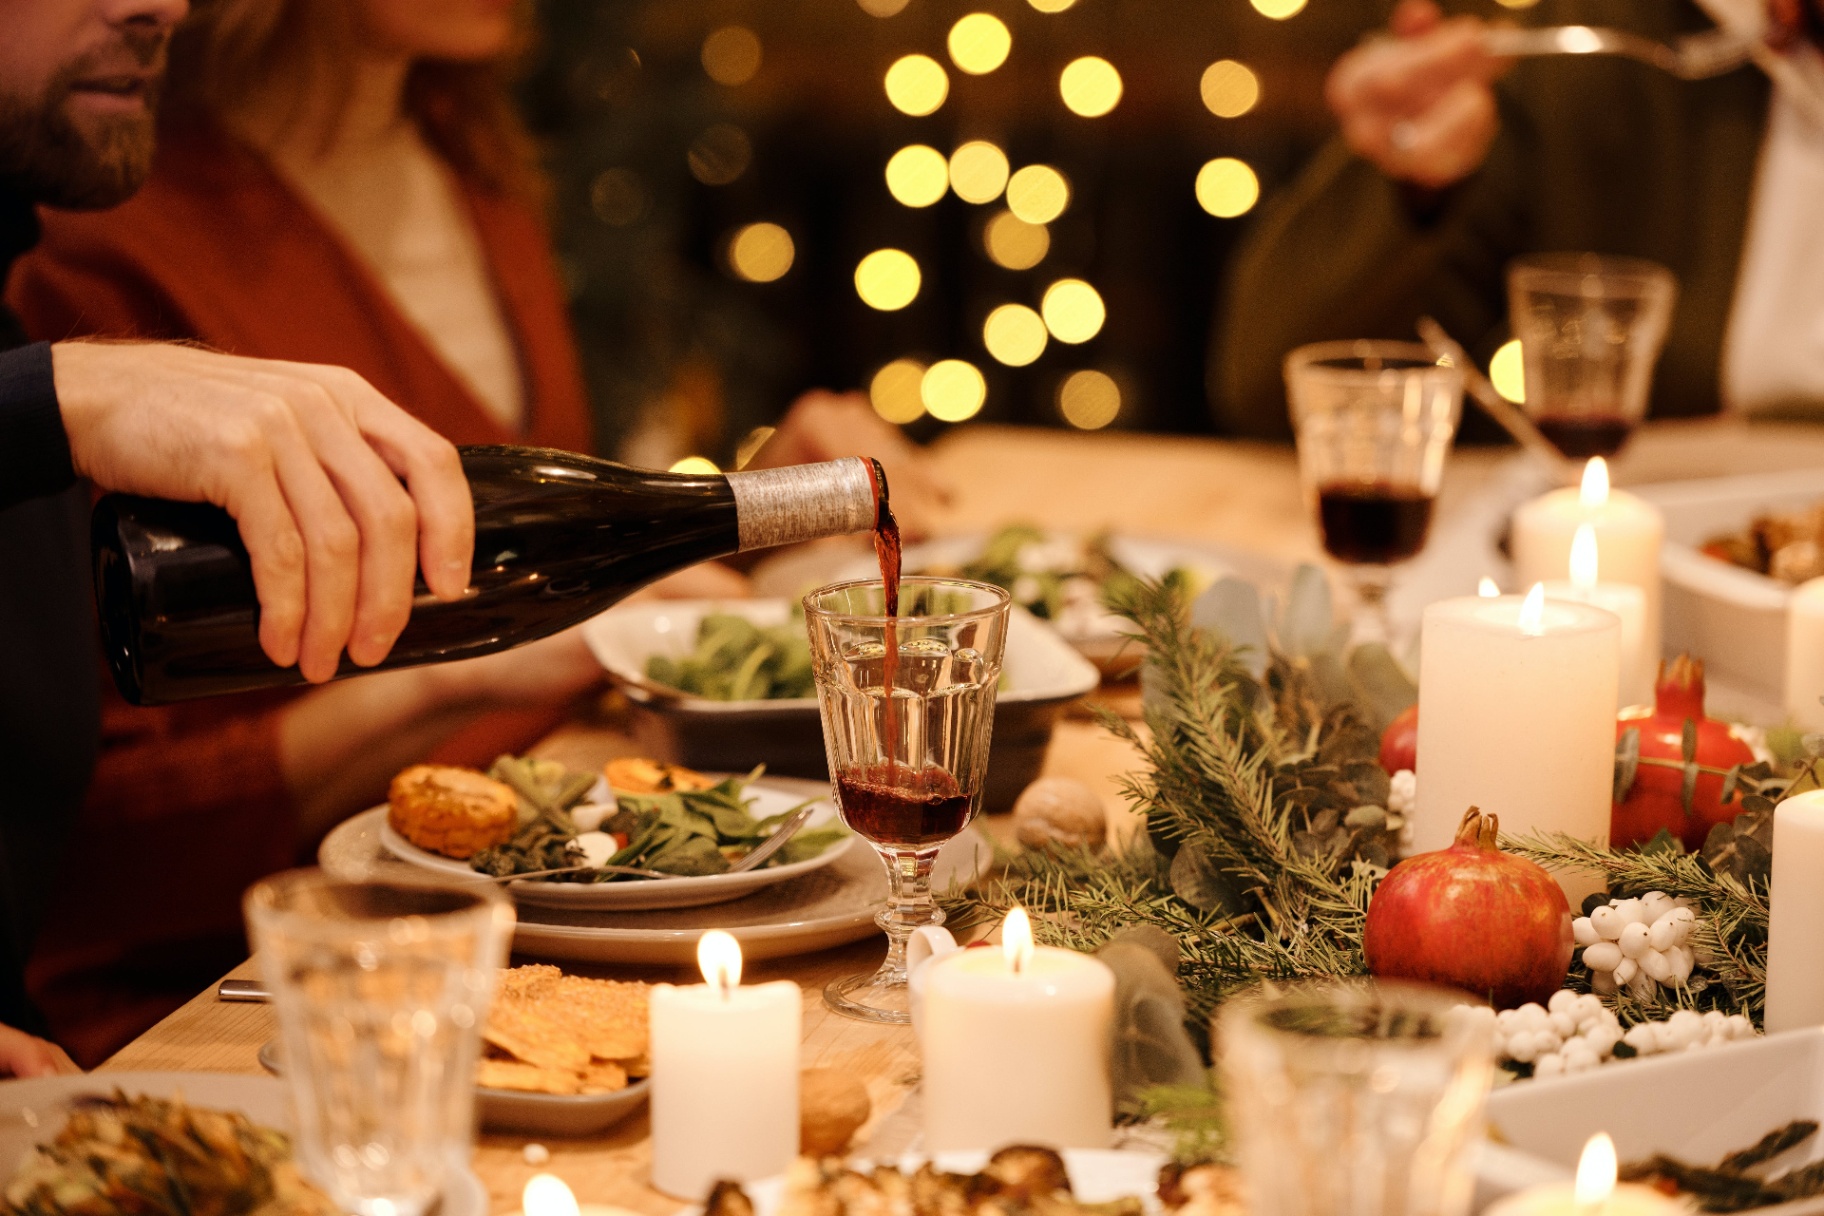 Image of a man pouring wine into a glass at dinner with others. Discover how effective anxiety therapy in Saint Petersburg, FL can help you work through your holiday anxiety.